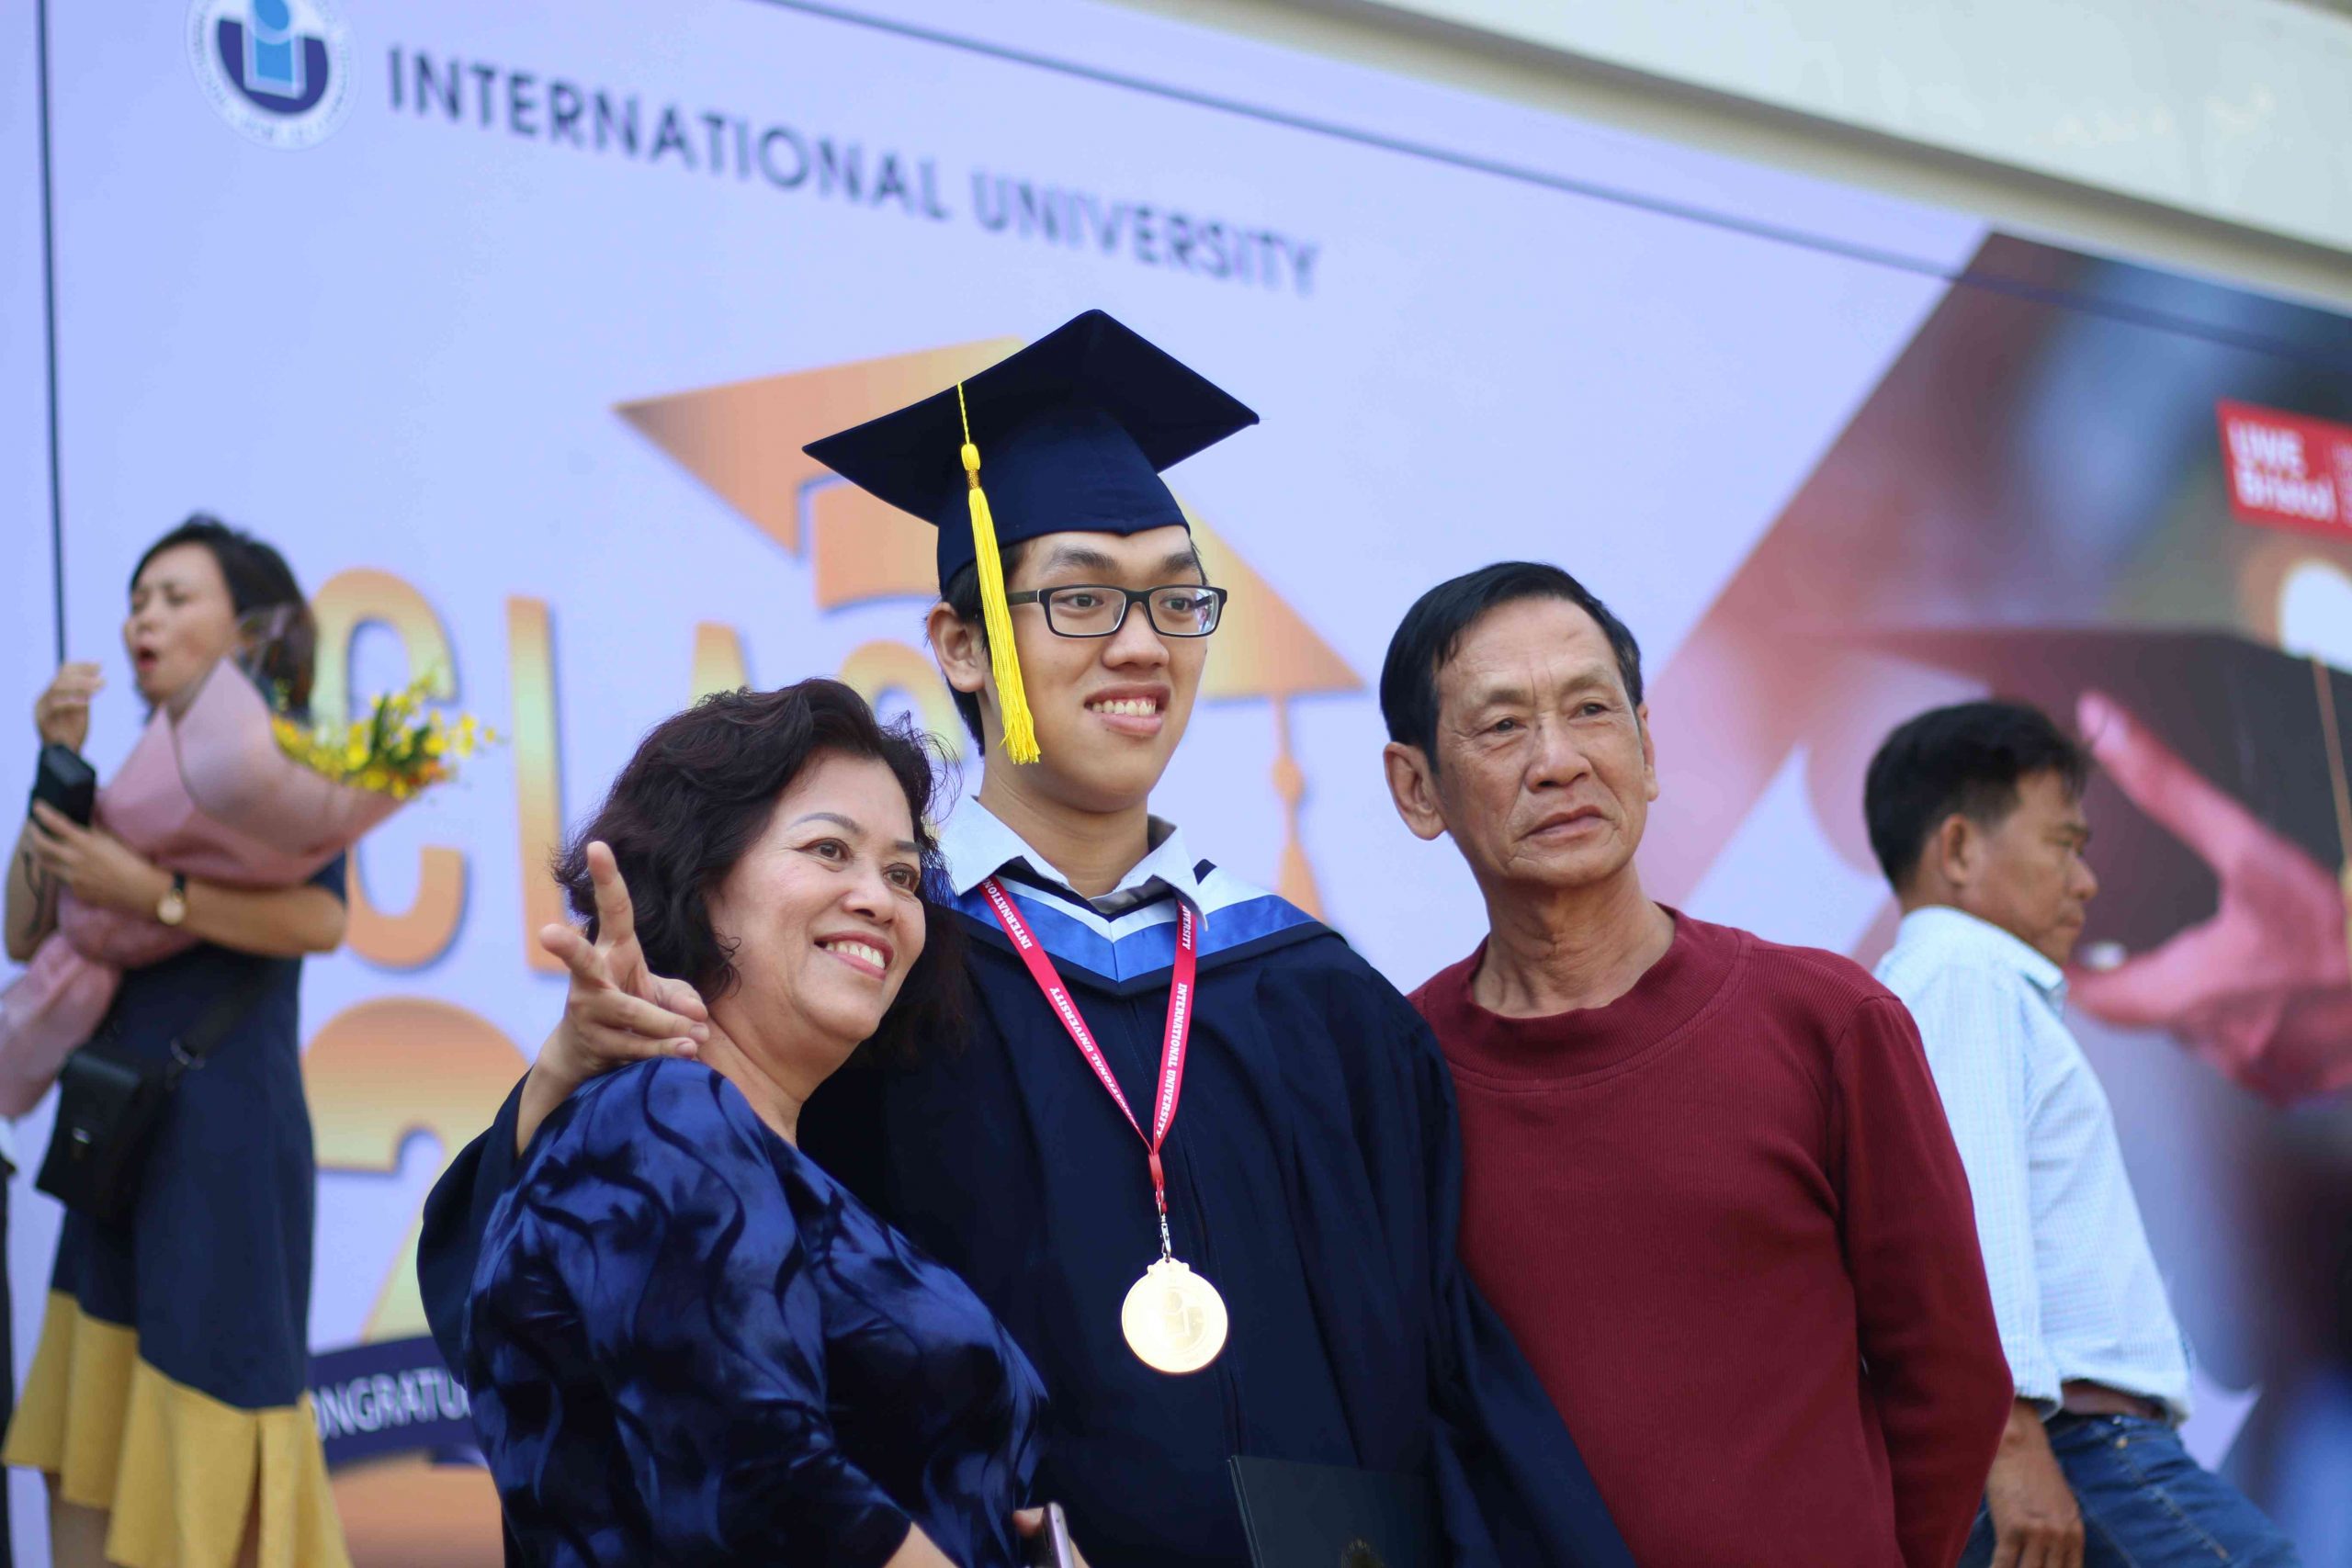 Nearly 1,000 new BA and BSc graduates and Masters graduated  from International University in 2019